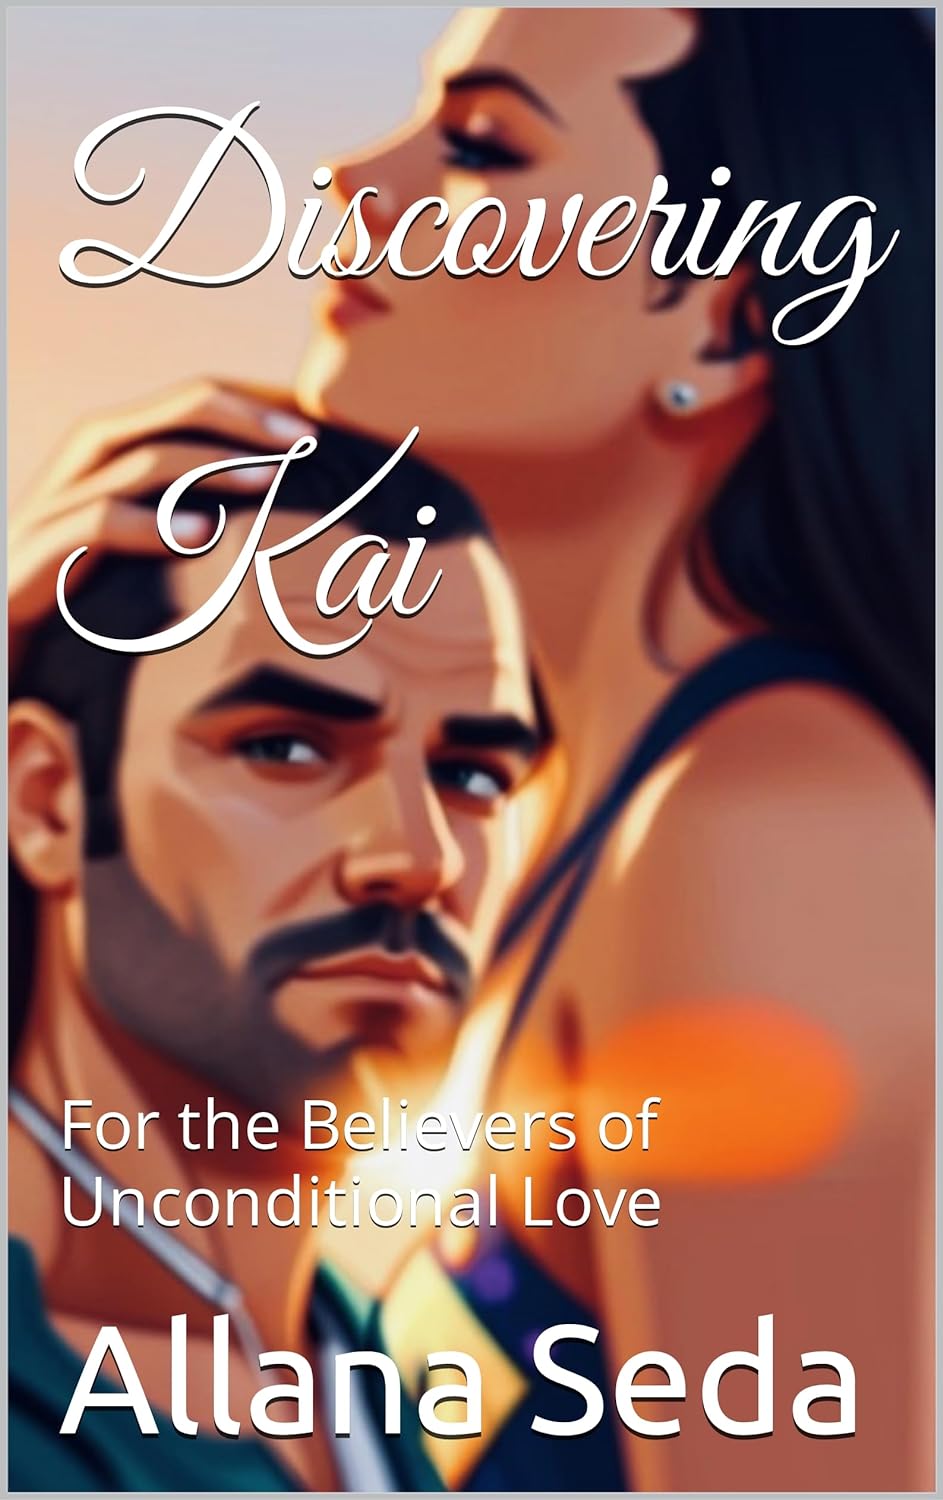 Anushka Sen Xnxx Iv - Discovering Kai : For the Believers of Unconditional Love by Allana Seda